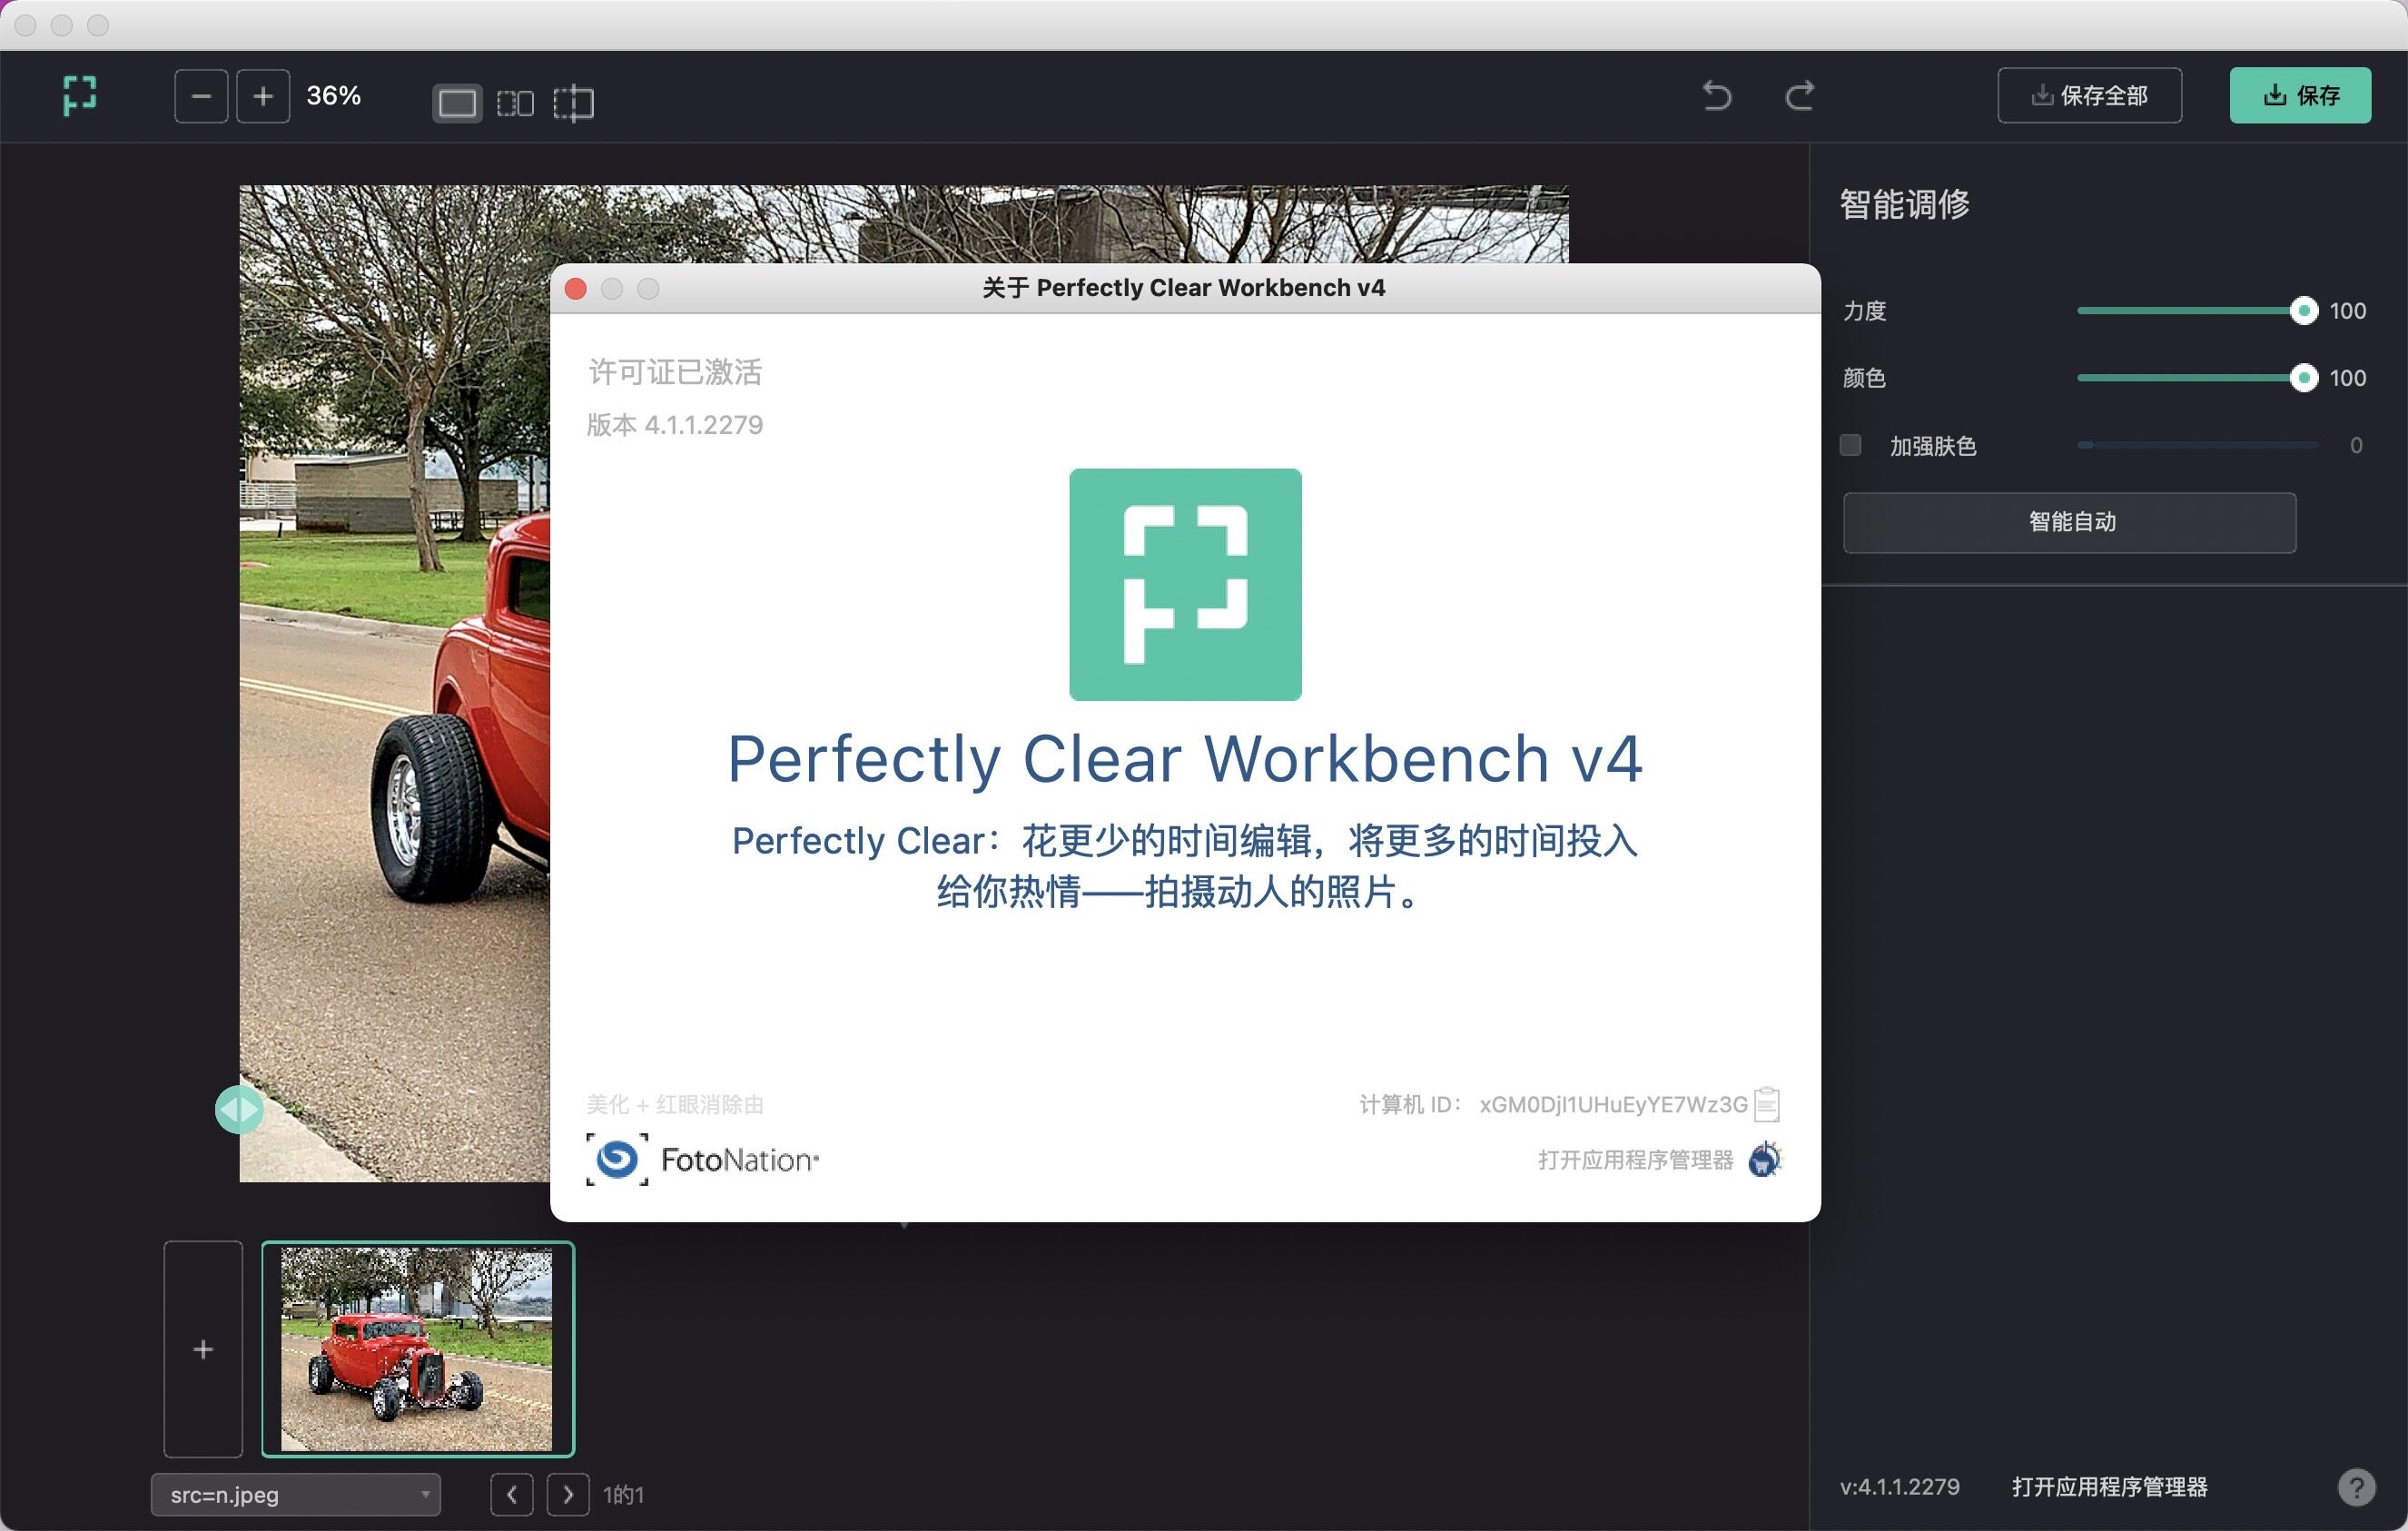 free instals Perfectly Clear WorkBench 4.5.0.2548